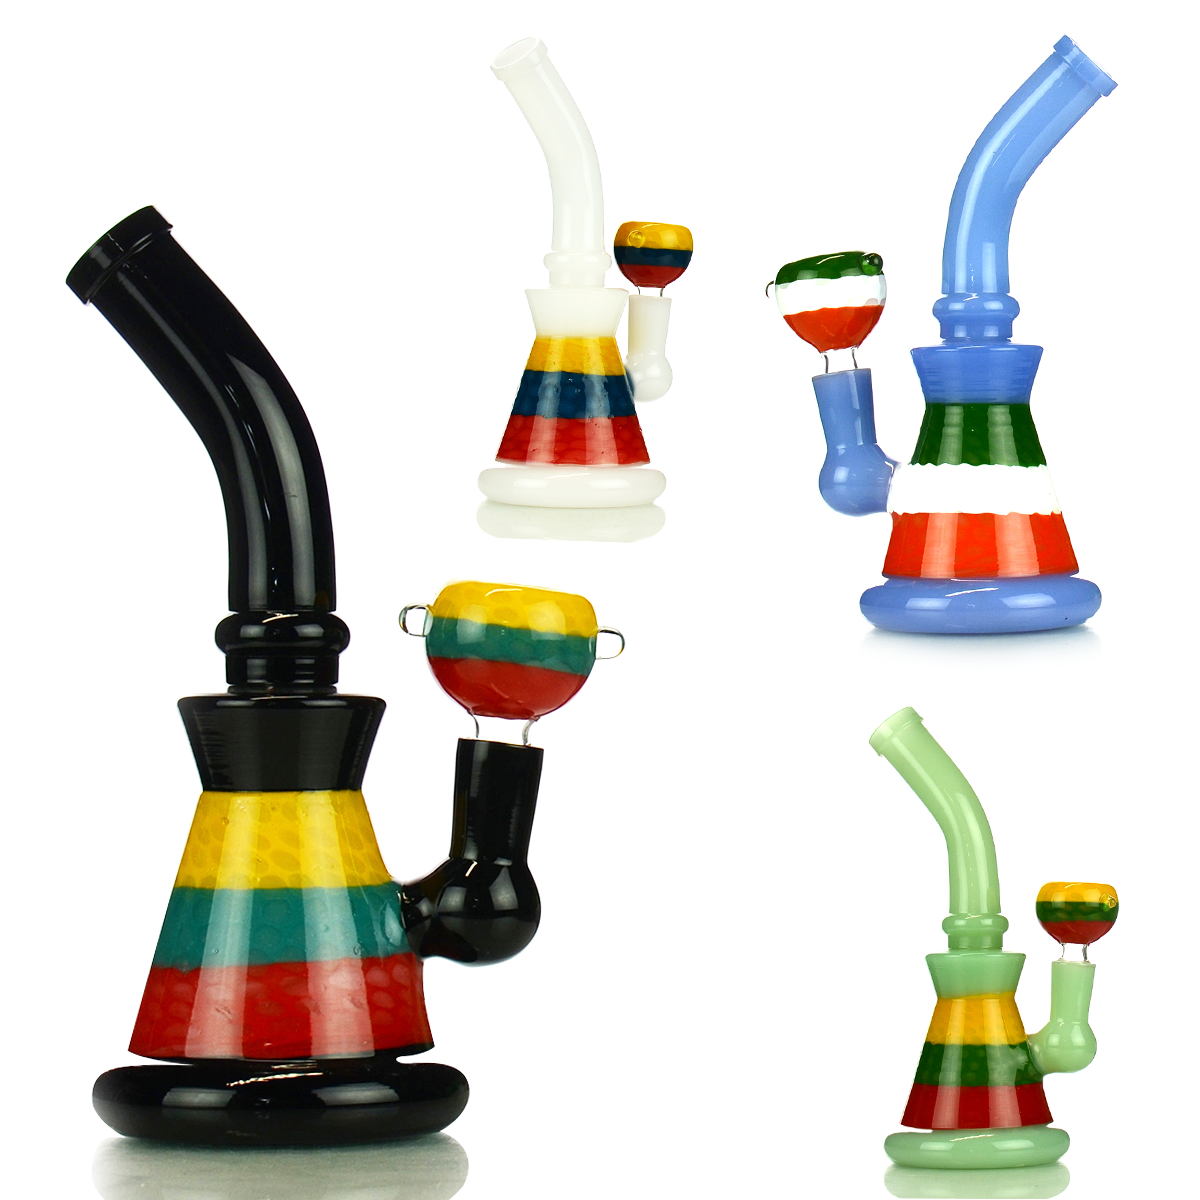 8” American Rod Color Bong Honey Mesh design with 14mm Male Bowl